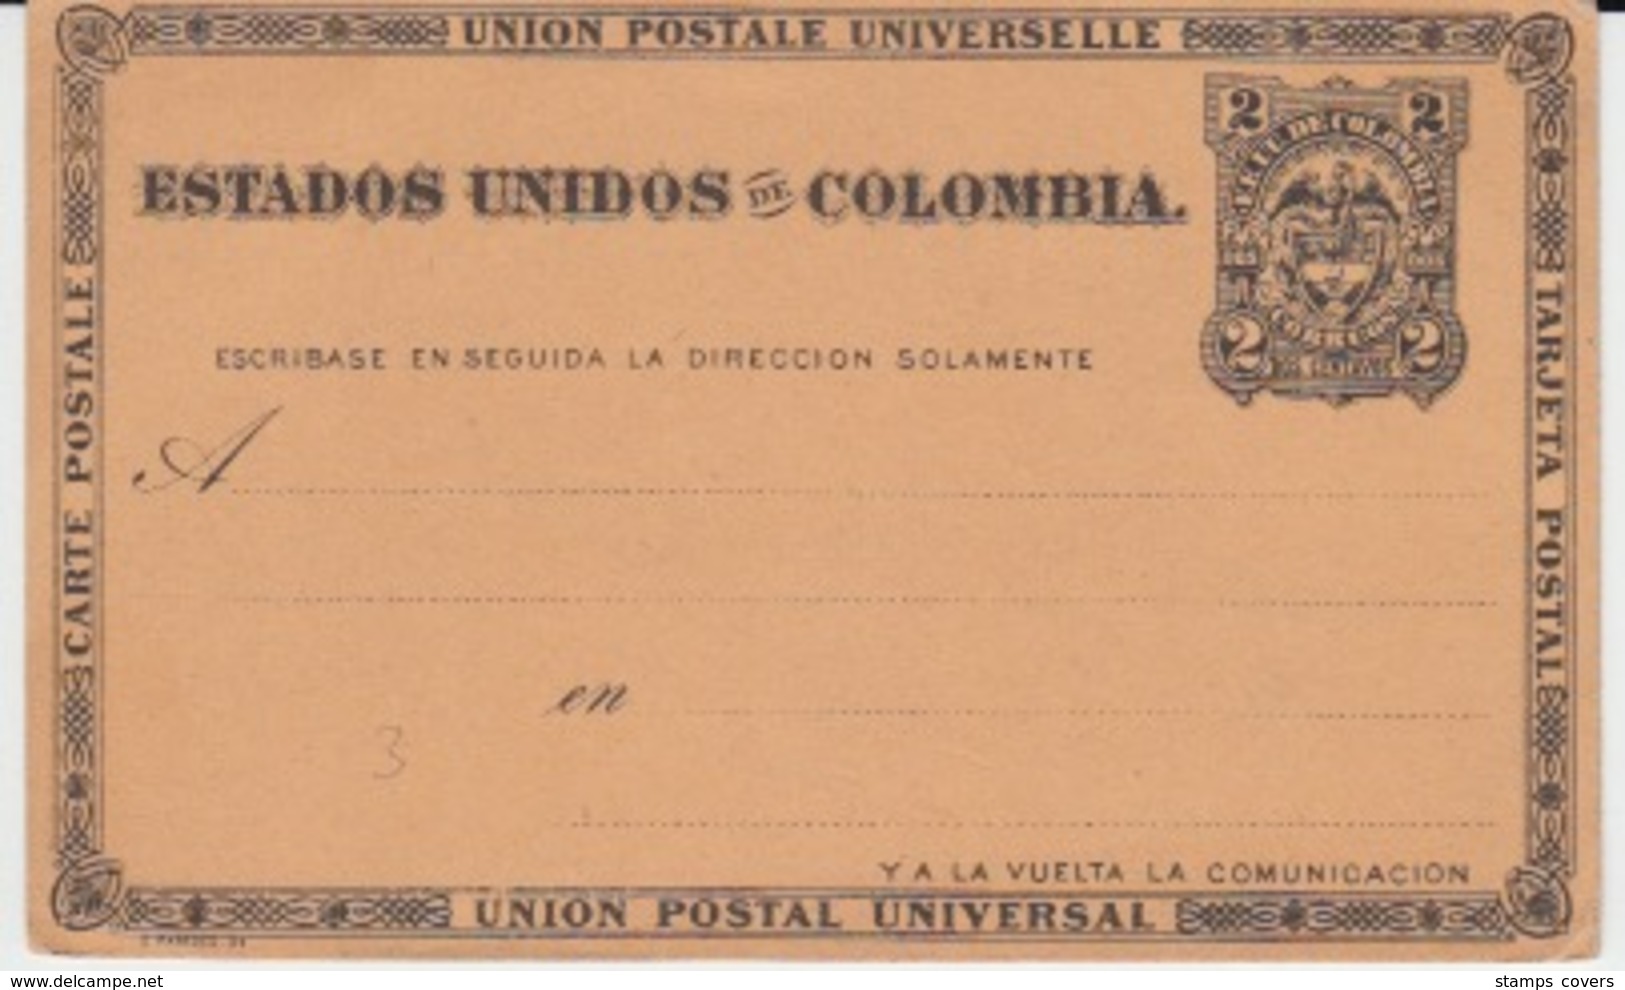 NEW POST CARD 2 CENTAVOS - Colombia